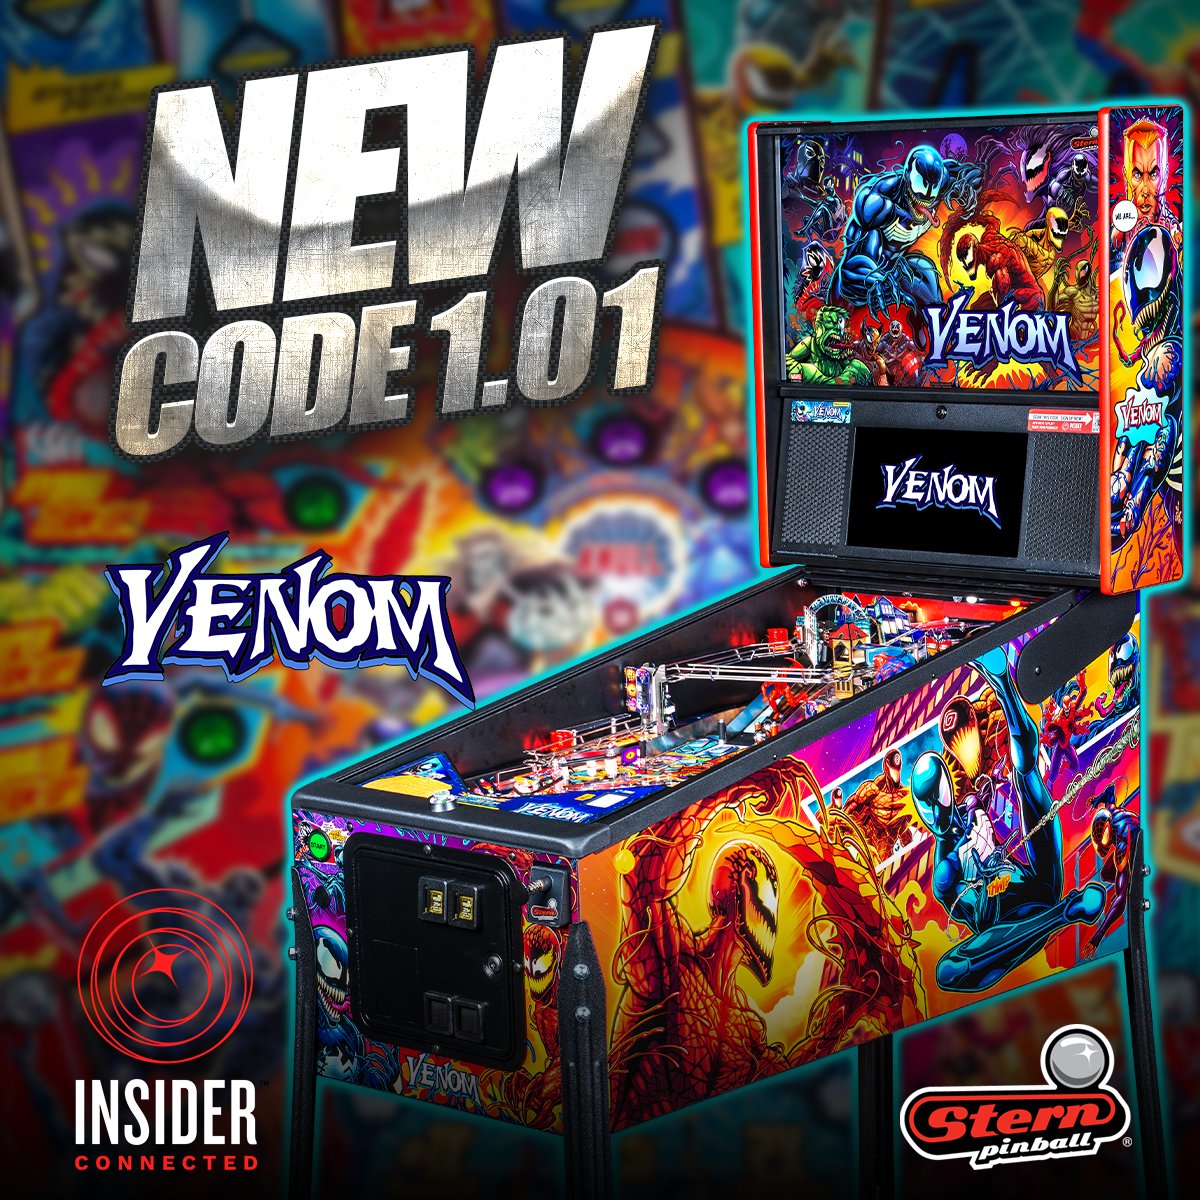 NEW CODE! Stern Pinball has posted new Venom v1.01.0 for the Pro, Premium, and Limited Edition models. This code contains: - Added Separate Insider Connected Progress for players that use IMPOSSIBLE or MONSTER GAME PLAY MODEs. Visit your Insider Connected Venom Progress tab to…